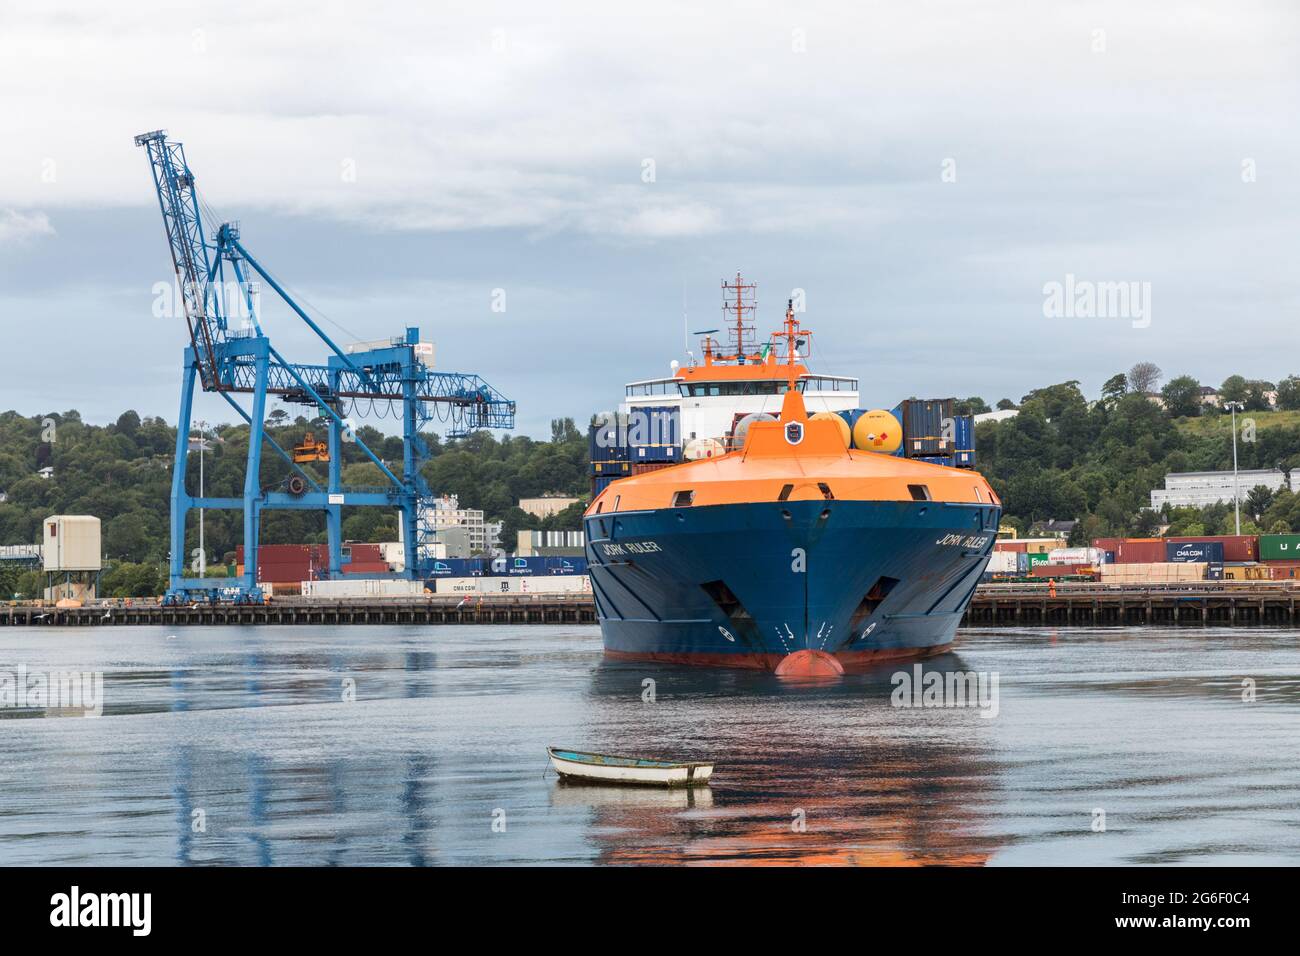 Tivoli, Cork, Ireland. 06th July, 2021. Container ship Jork Ruler performs a 360 degree turning manoeuvre on the River Lee after arriving from Rotterdam at Tivoli docks in Cork City, Ireland. - Picture; David Creedon / Alamy Live News Stock Photo